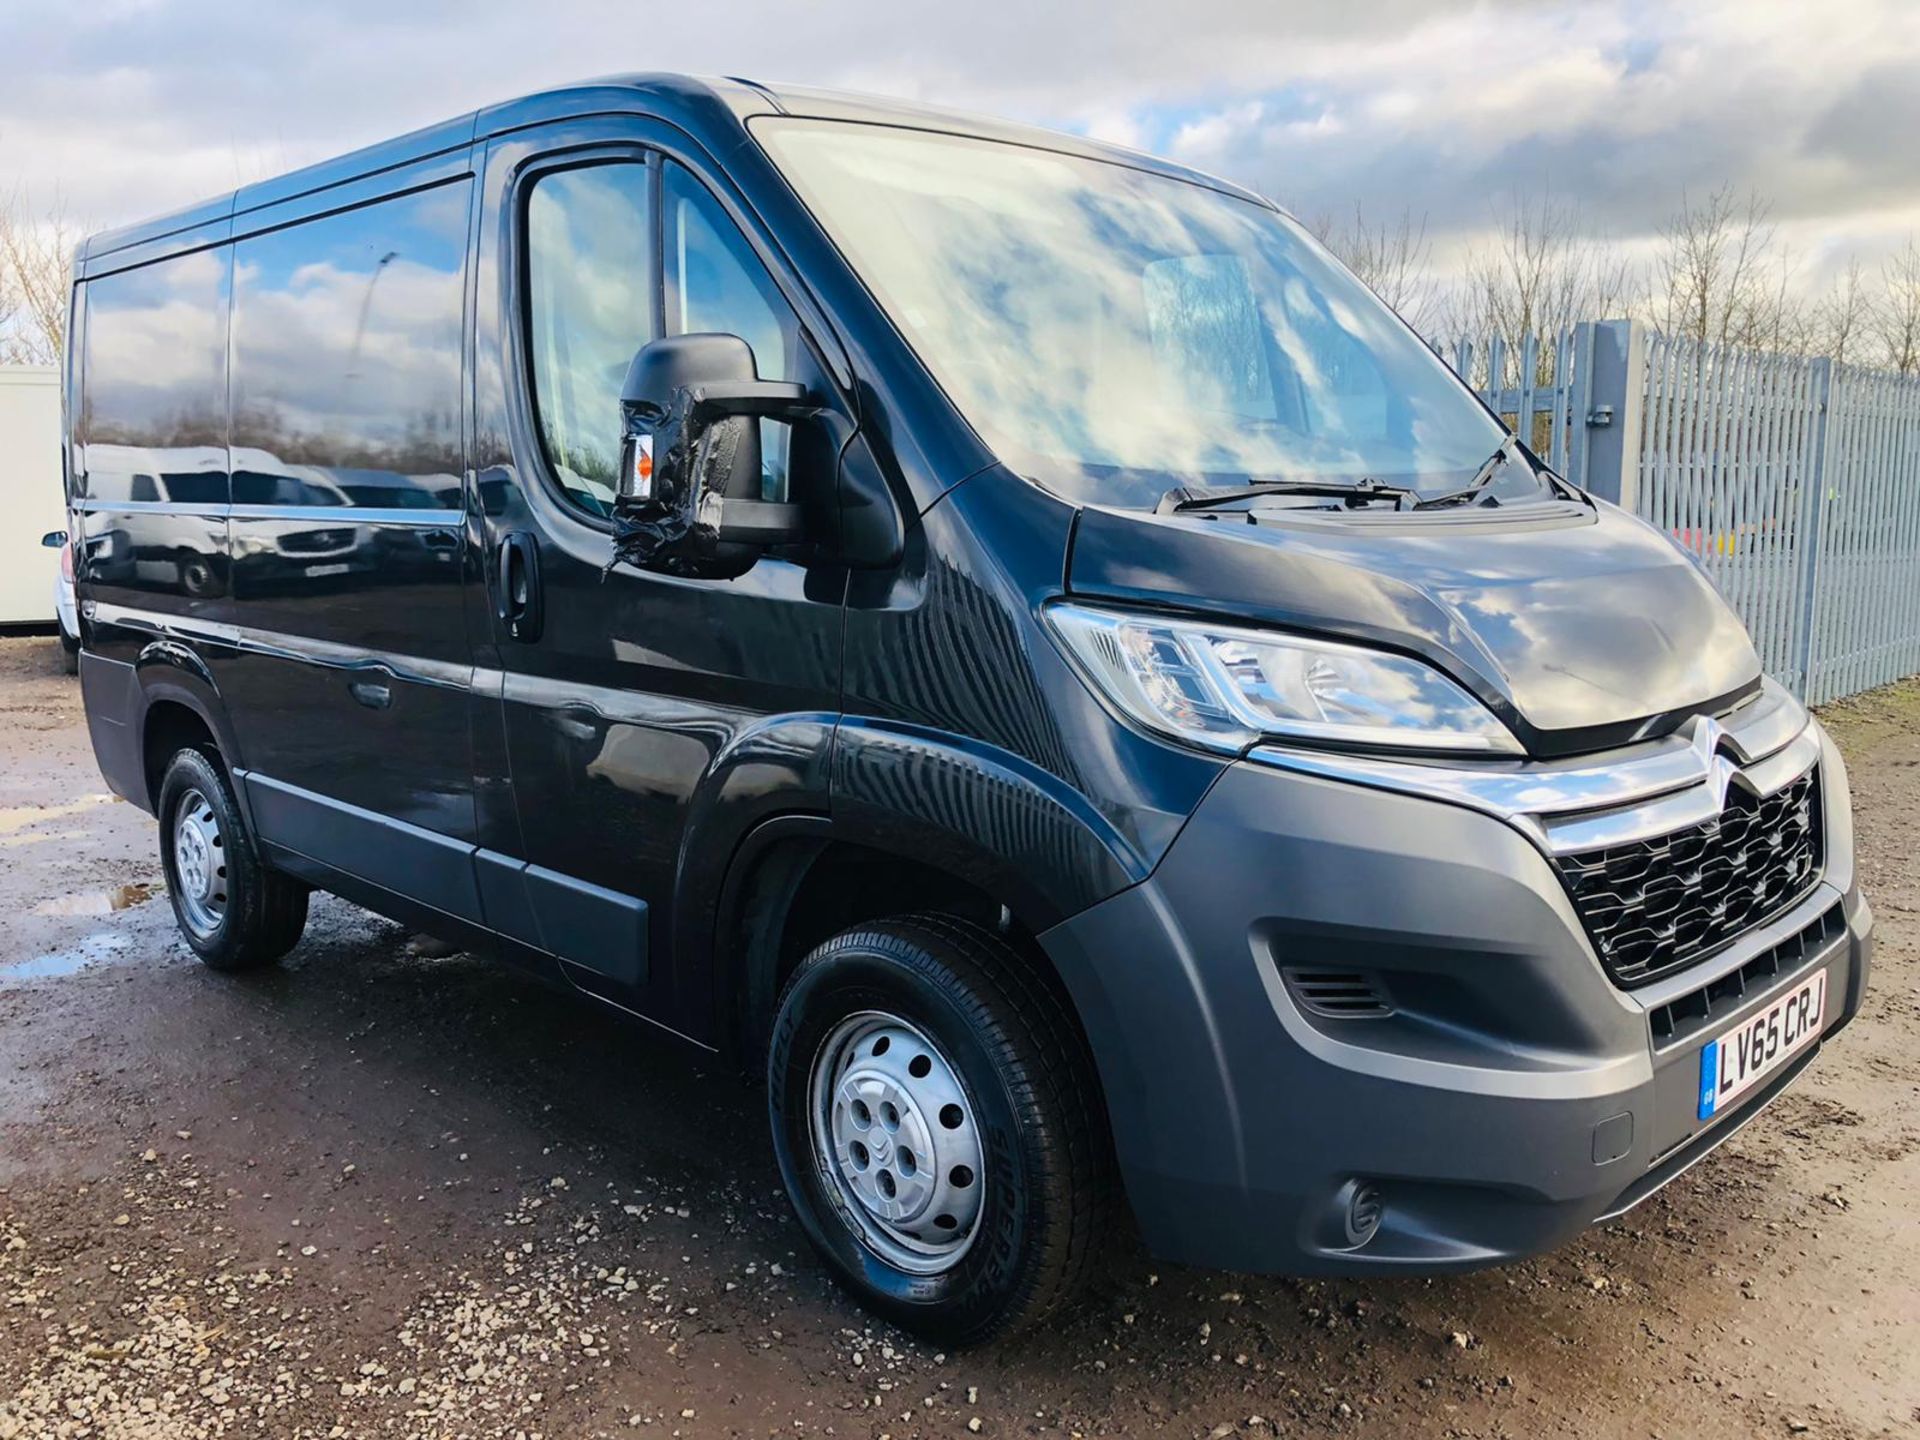 Citroen Relay 2.2 HDI Enterprise L1 H1 2015 '65 Reg' Air Con - ** Low Miles ** Only Done 65k - Image 2 of 21